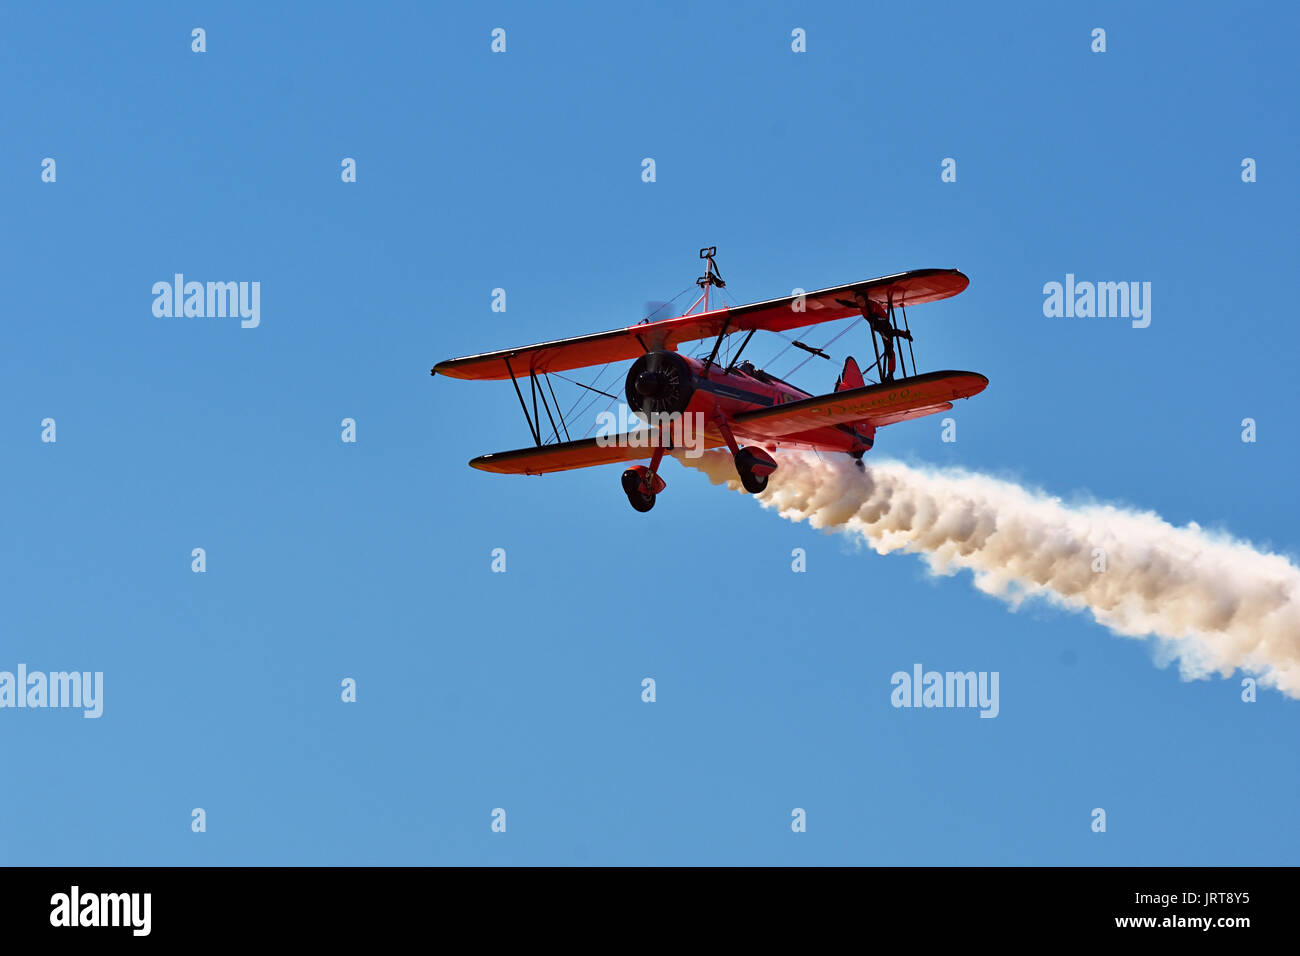 Czech Sport Aircraft High Resolution Stock Photography and Images - Alamy